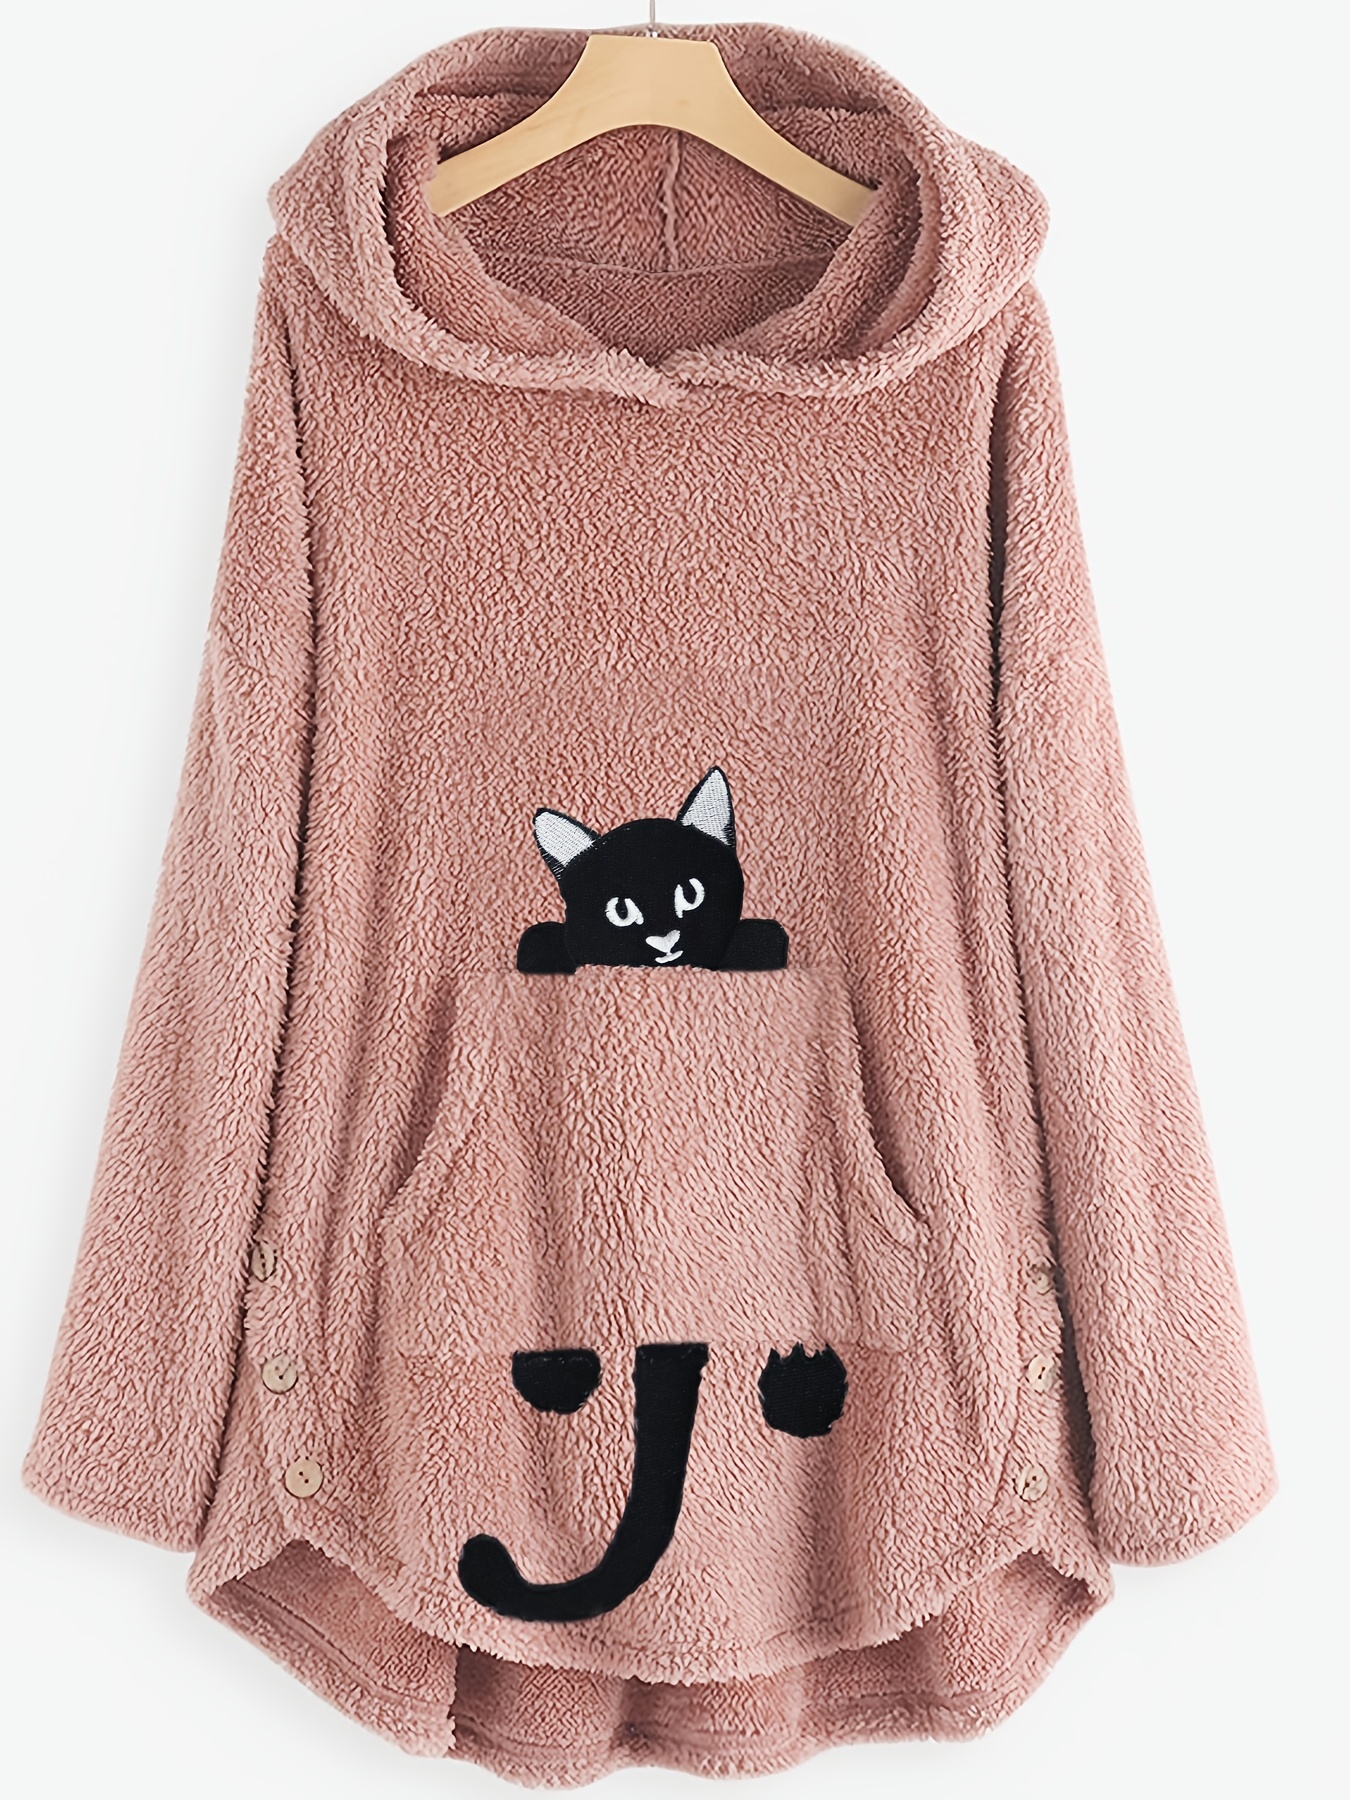 Soft Faux Fur Sweater For Hairless Cats Cute And Cozy Pullover For